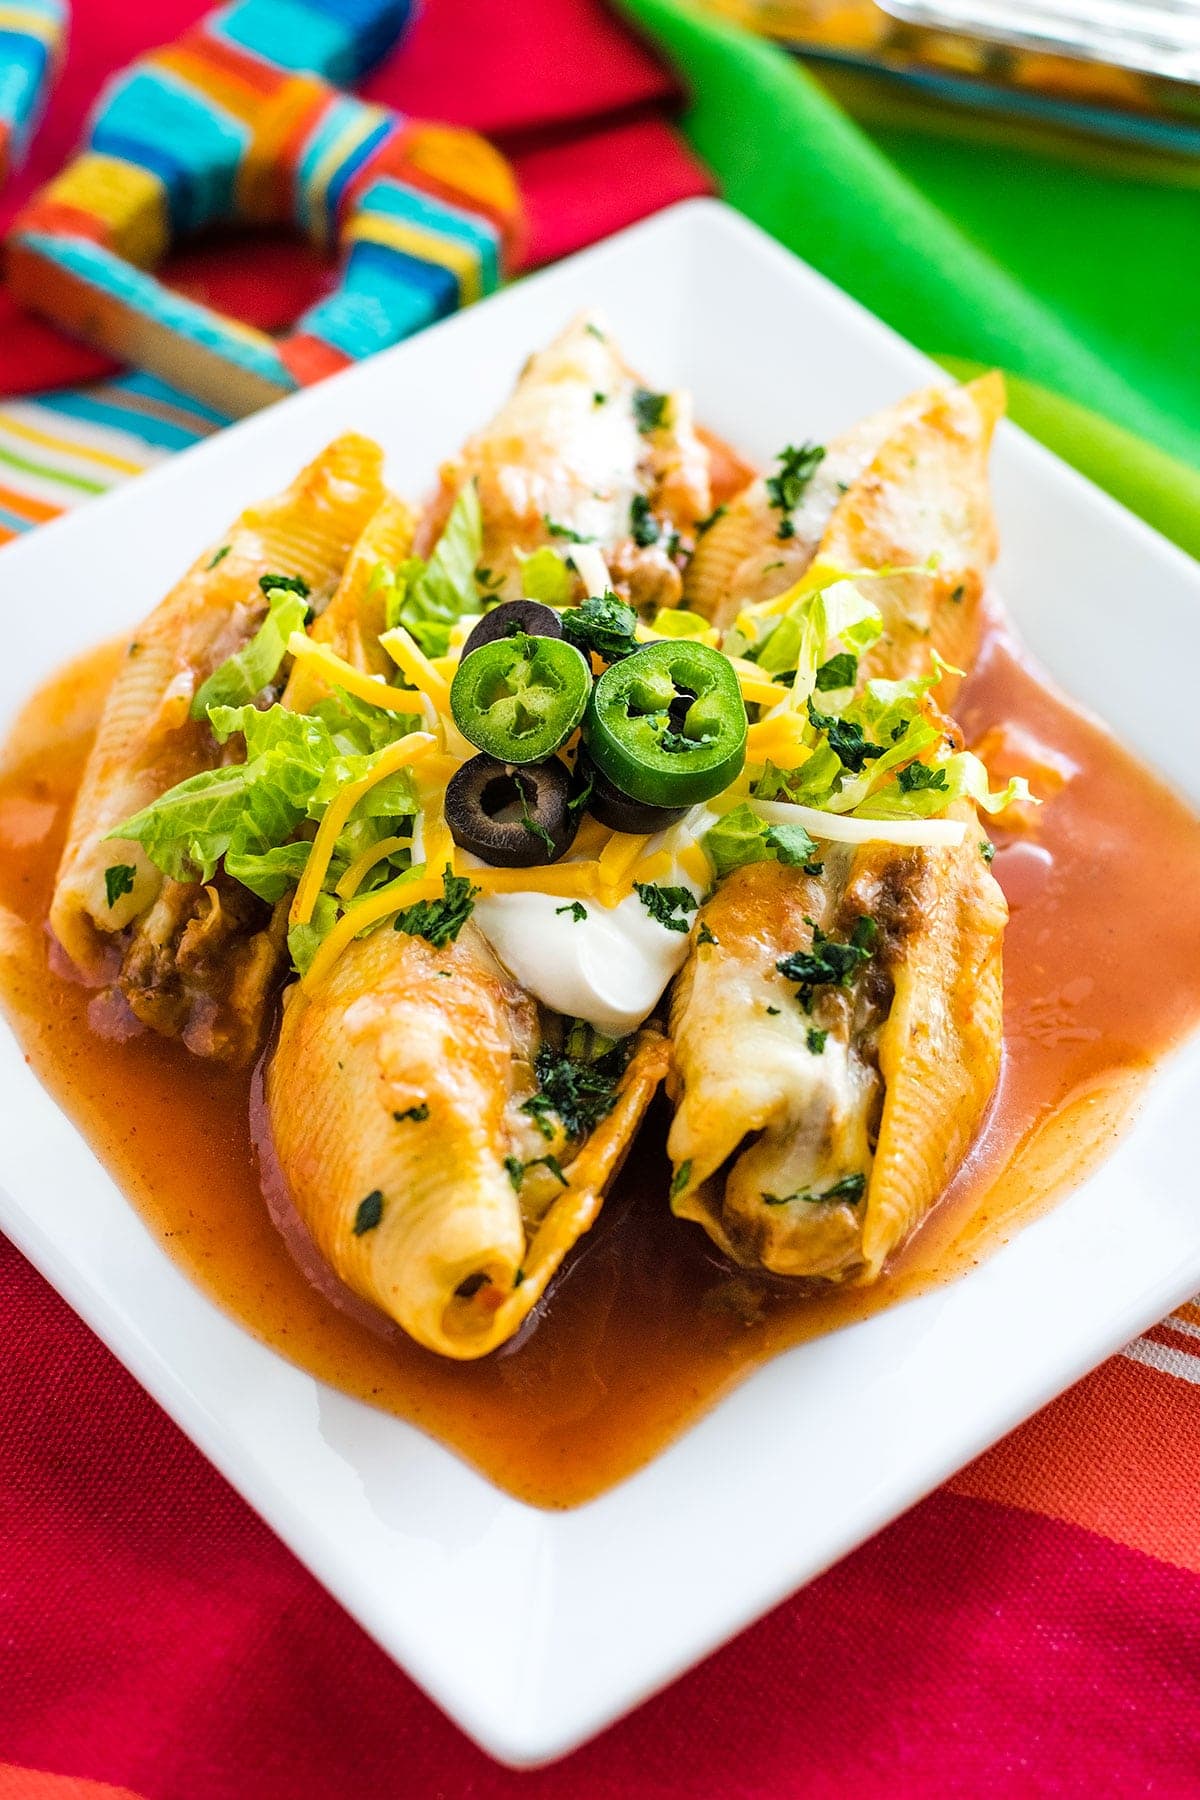 Baked Mexican Stuffed Shells topped with taco toppings on a white plate.